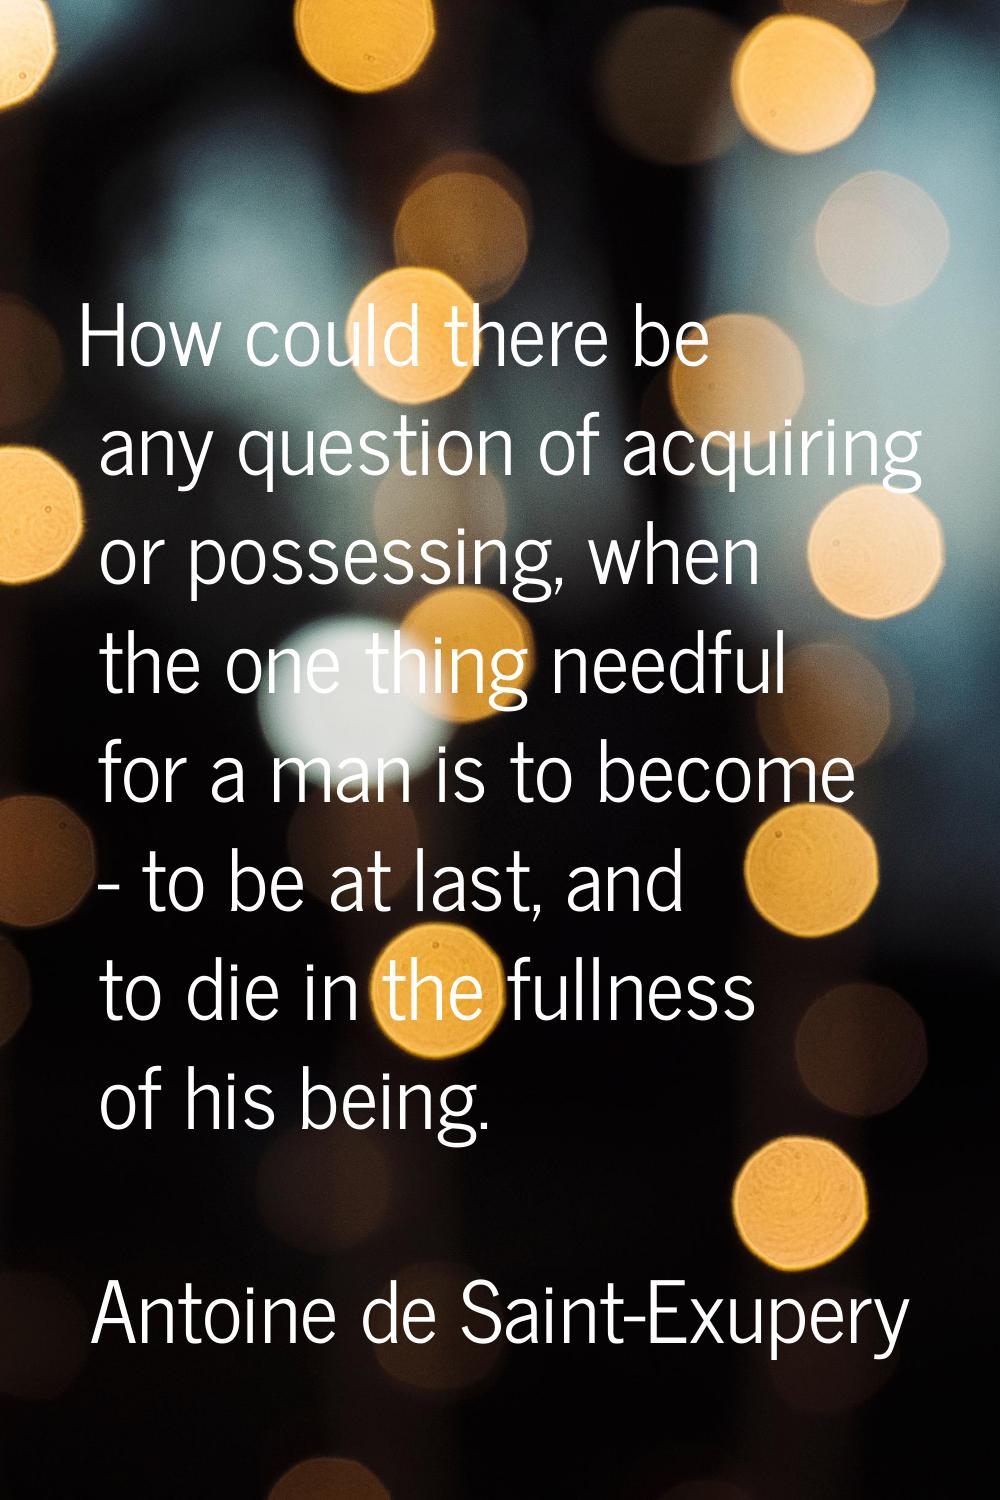 How could there be any question of acquiring or possessing, when the one thing needful for a man is